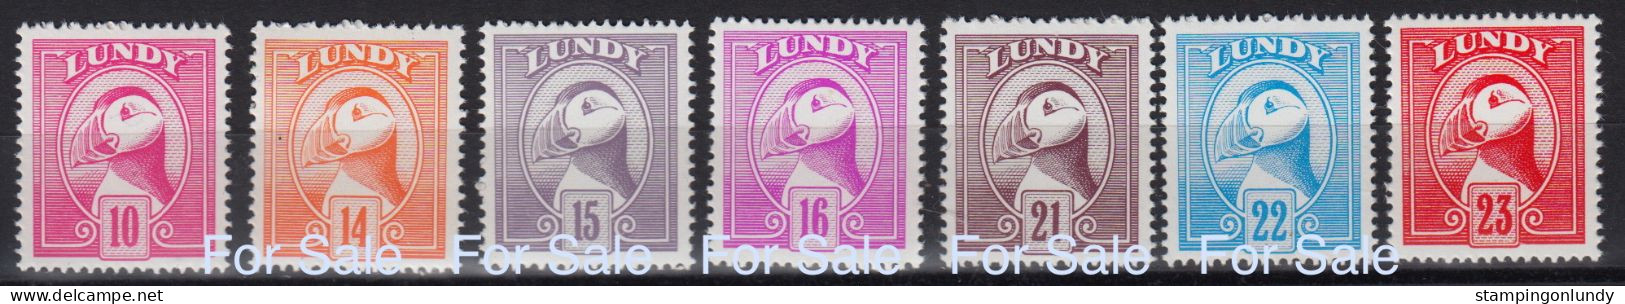 #09 Great Britain Lundy Island Puffin Stamp 1982 Definitives Colour Trial #234-237/242-244 Retirment Sale Price Slashed! - Local Issues